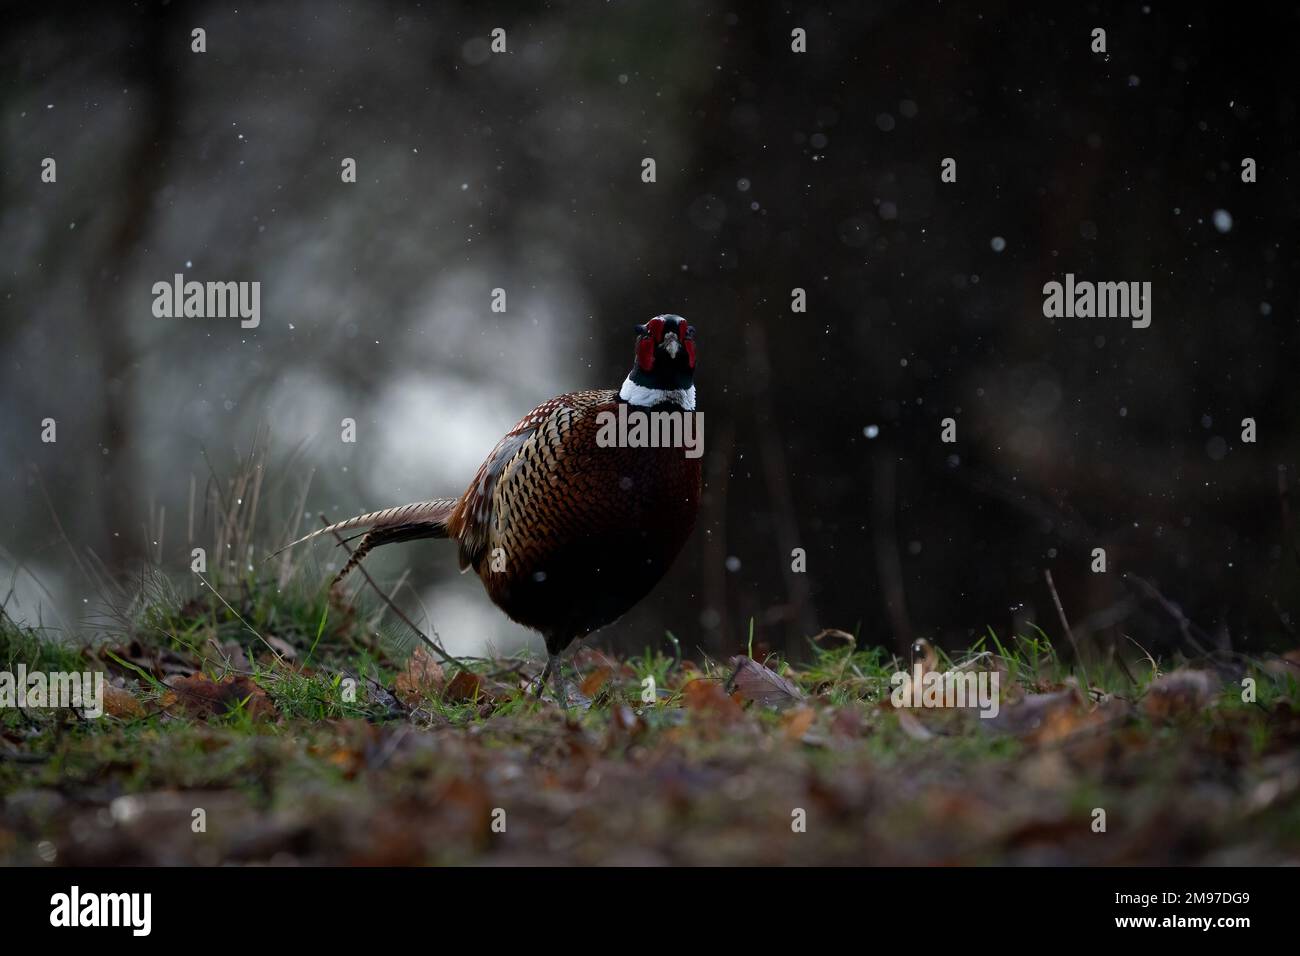 A pheasant in the snow. UK: THESE BEAUTIFUL snowy images captured on 16th January 2023 show how beautiful English wildlife can be. One image shows a S Stock Photo